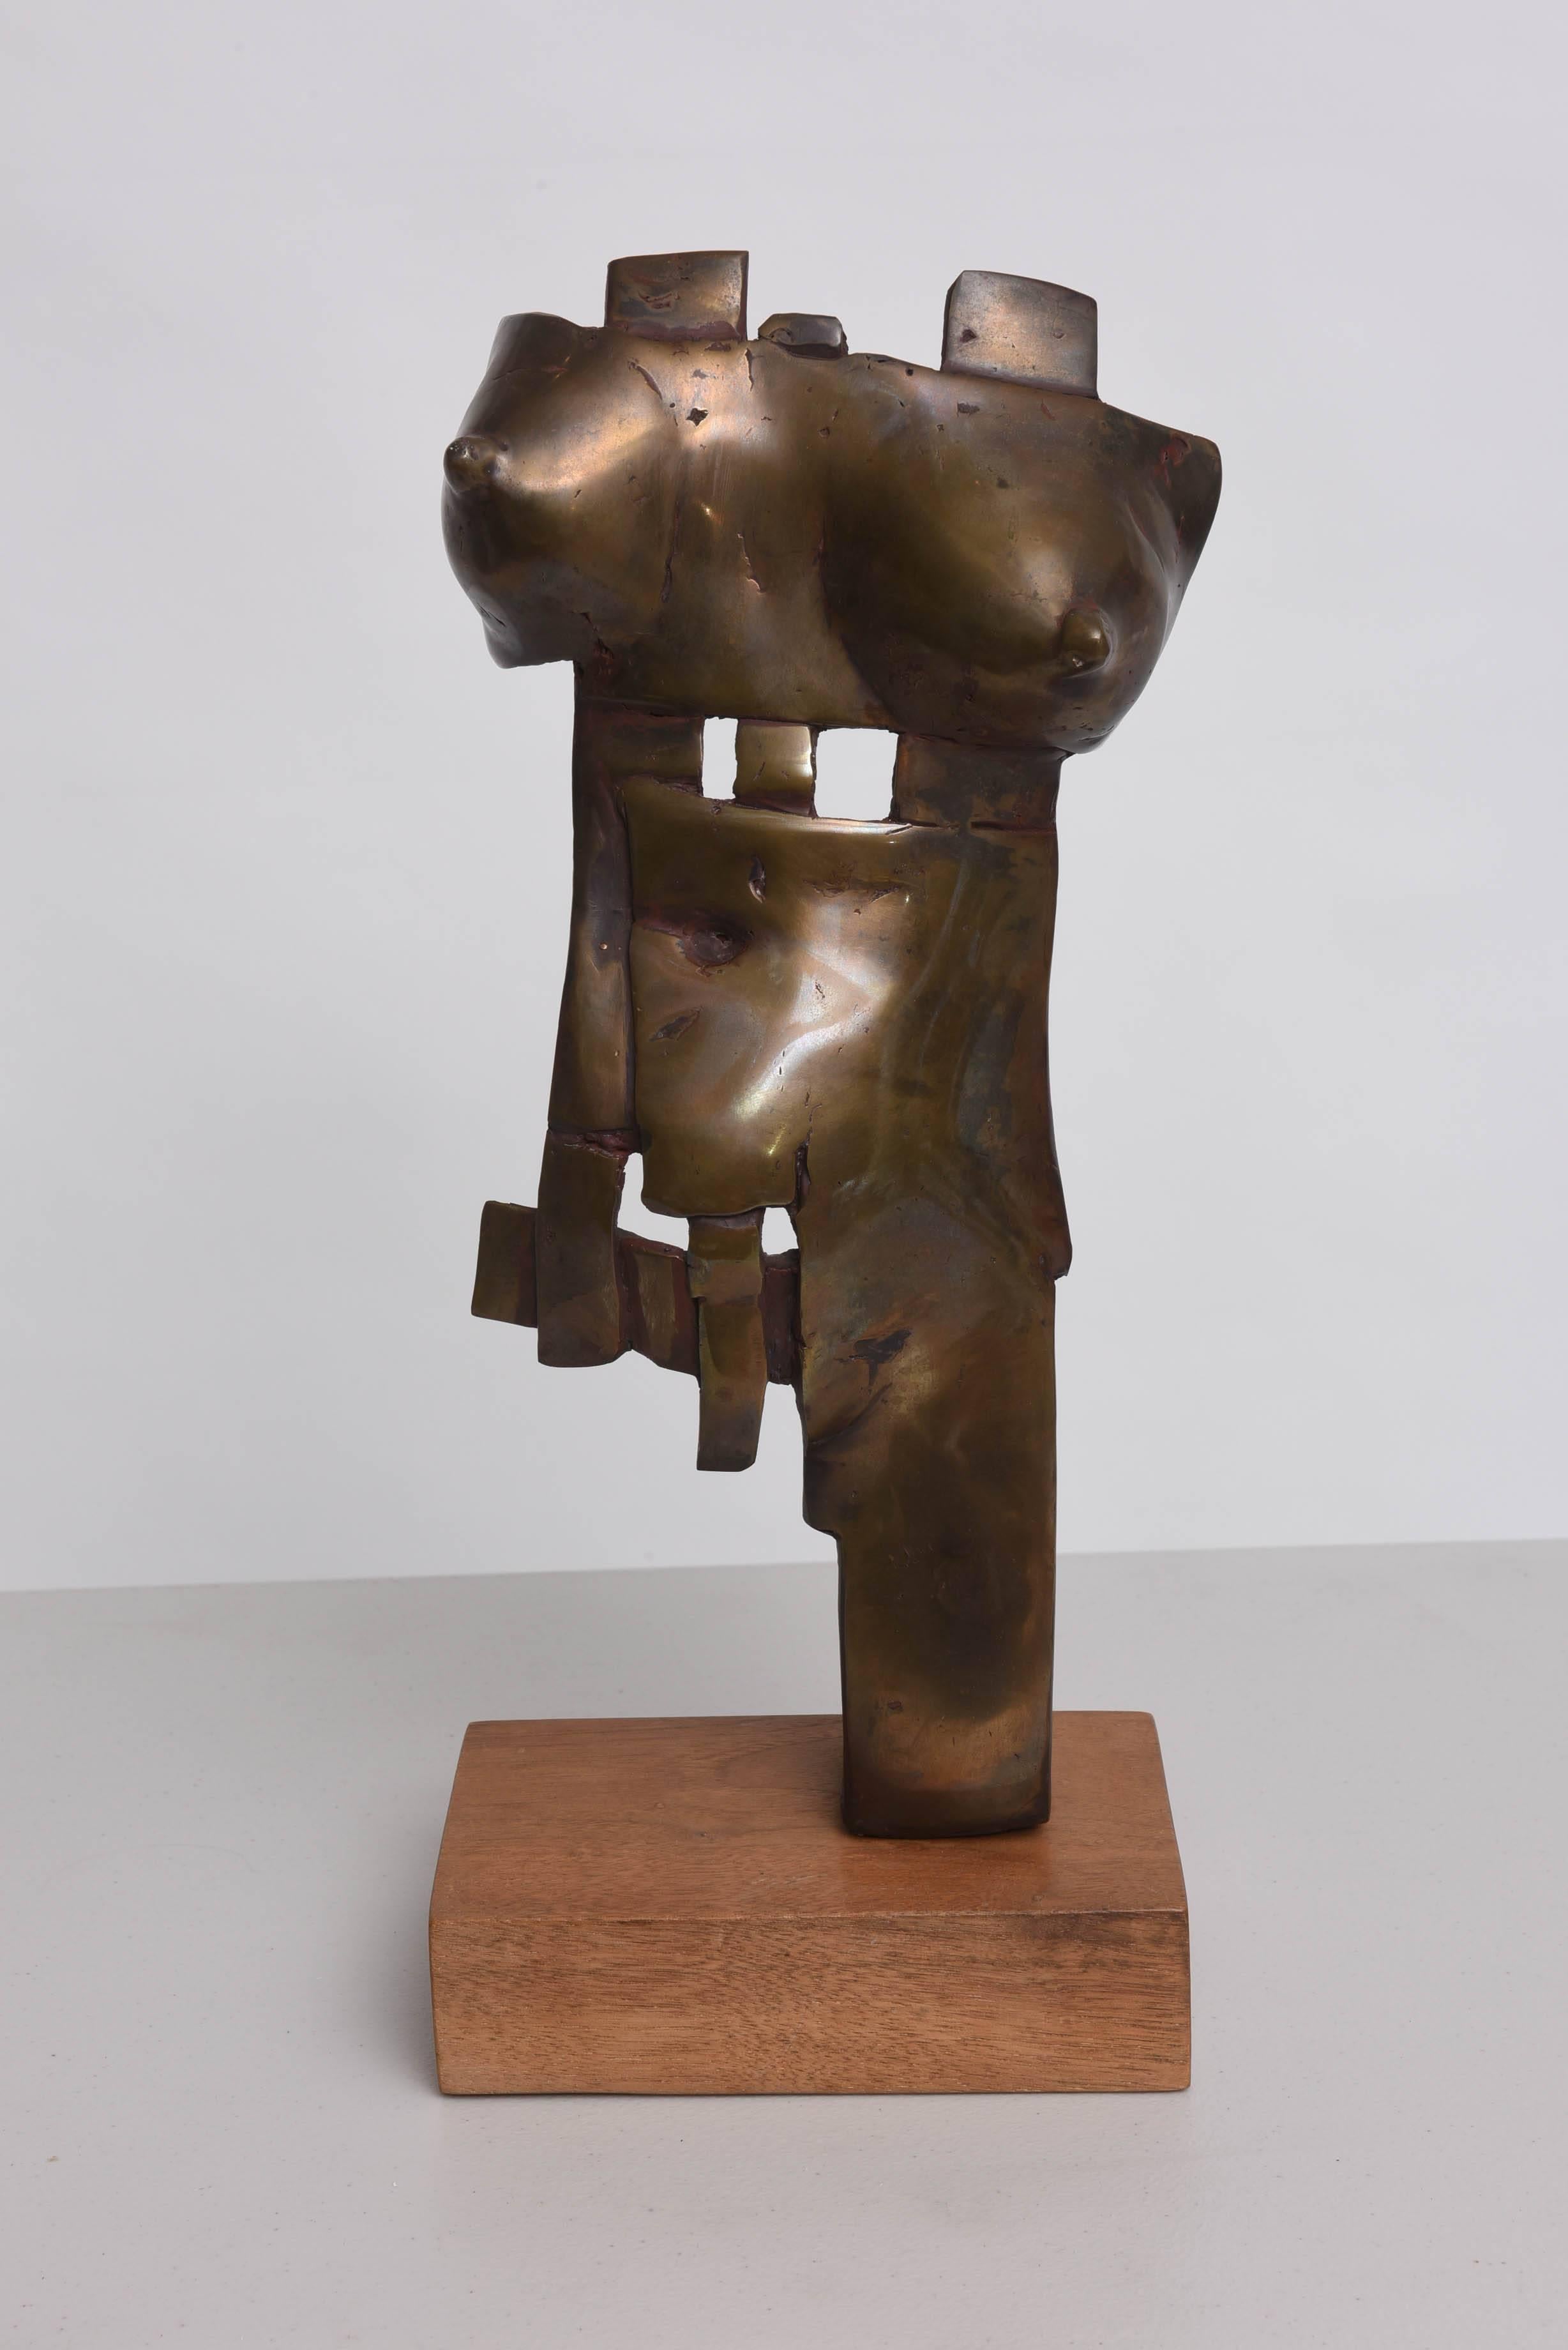 This amazing sculpture was created in the 1960s and is signed.  Unfortunately the signature is not legible, so will remain a mystery for now.  

Here the sculptor has expressed the female form with a brutalist-hand which shows a force of power and